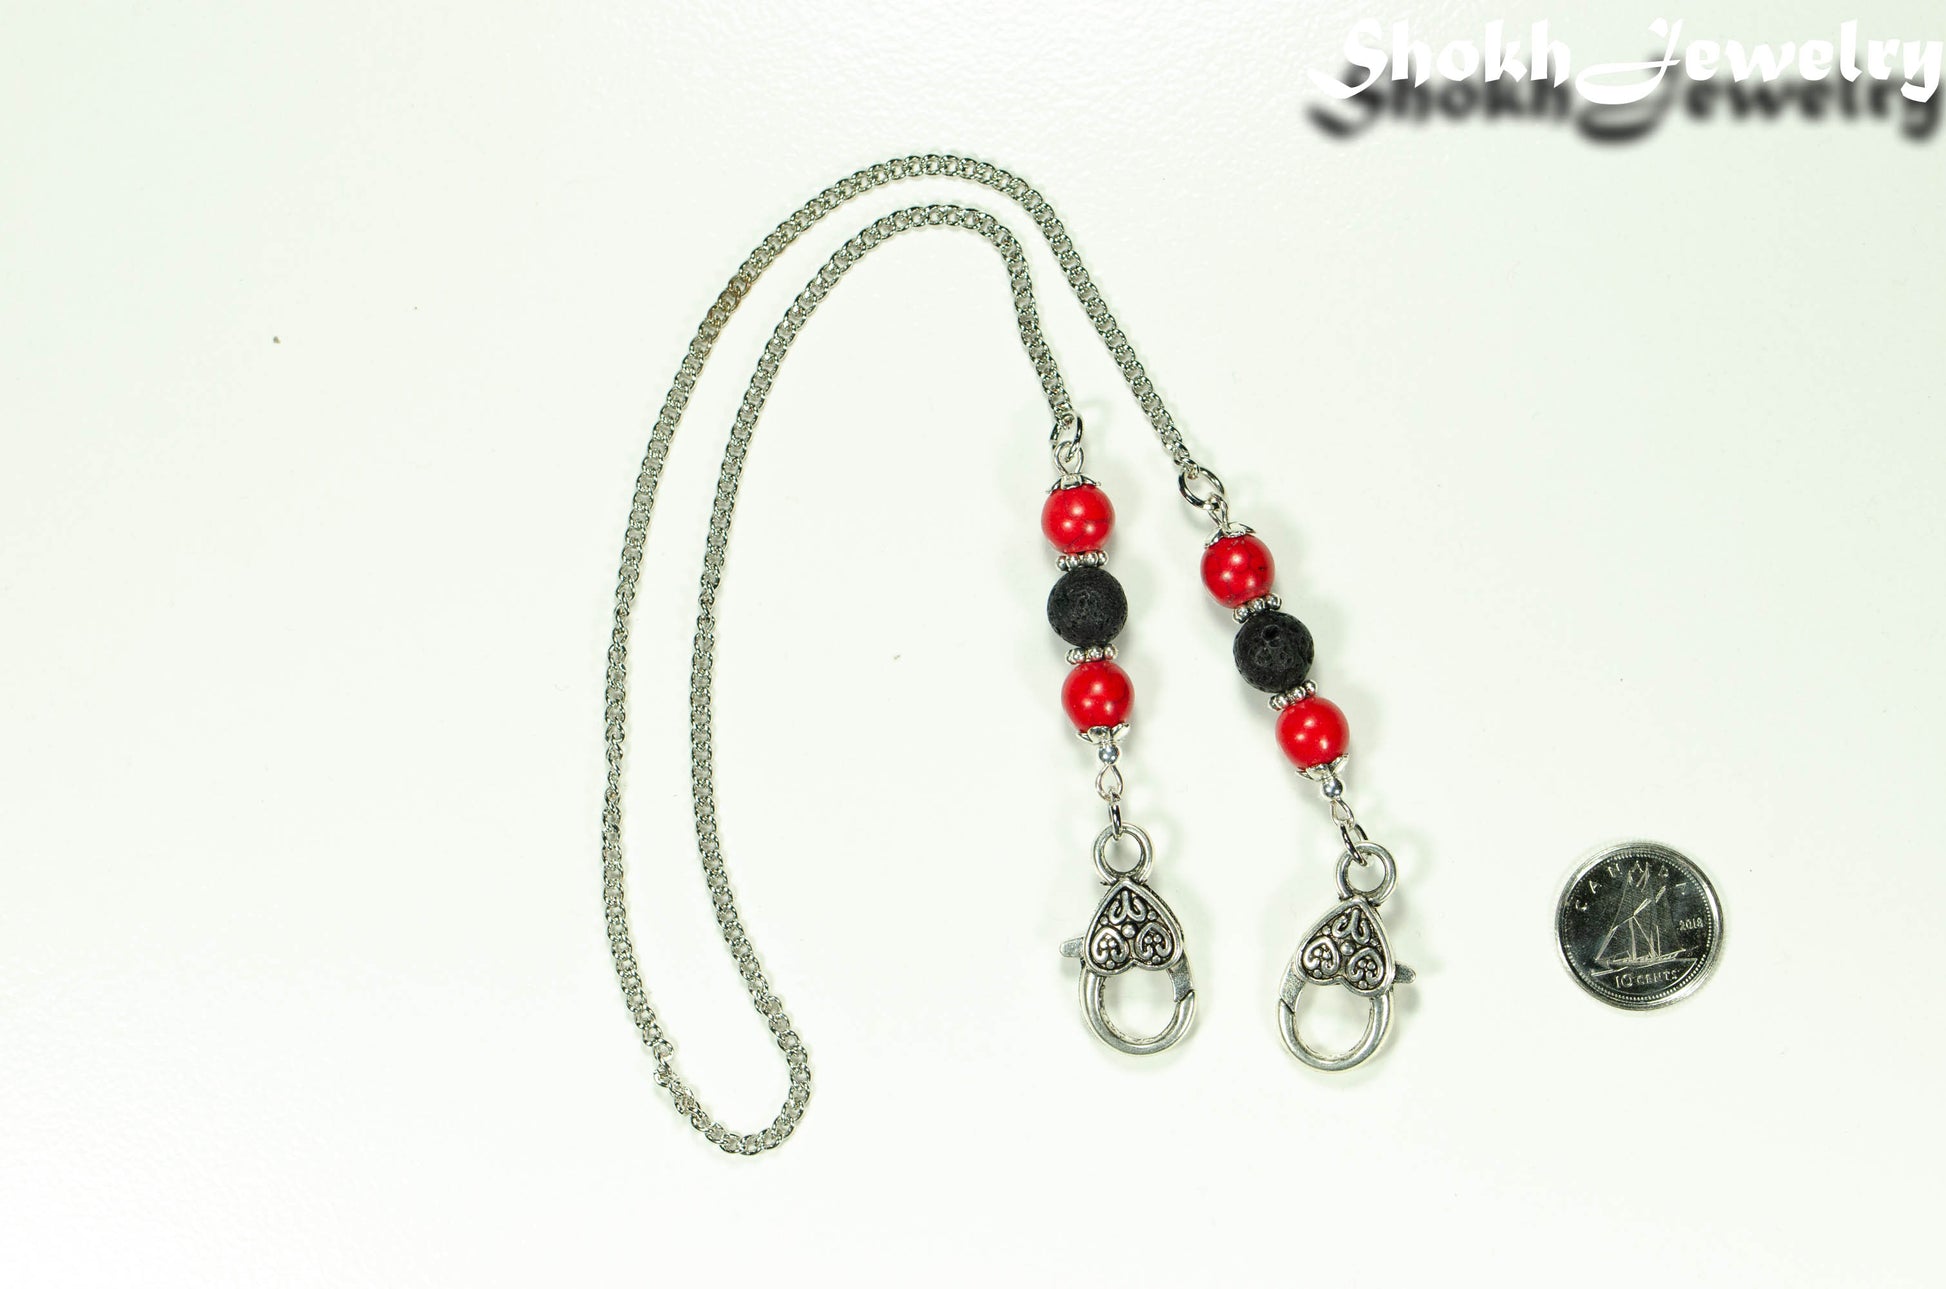 8mm Red Howlite and Black Lava Stone Eyeglass Chain beside a dime.